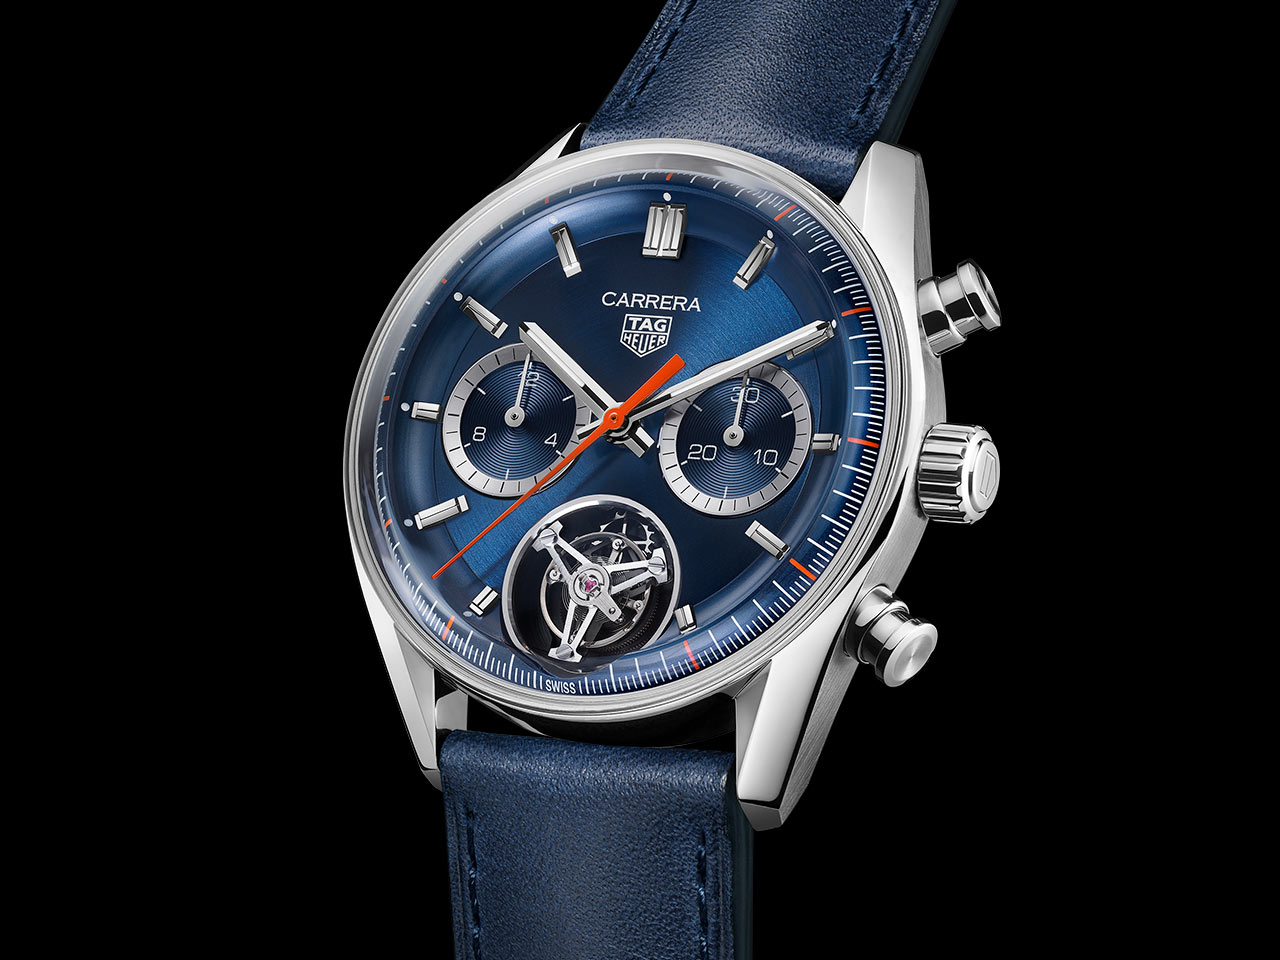 Tag Heuer Carrera Chronograph Tourbillon 42mm Watch - Blue Dial - Blue Leather Band - Steel Case